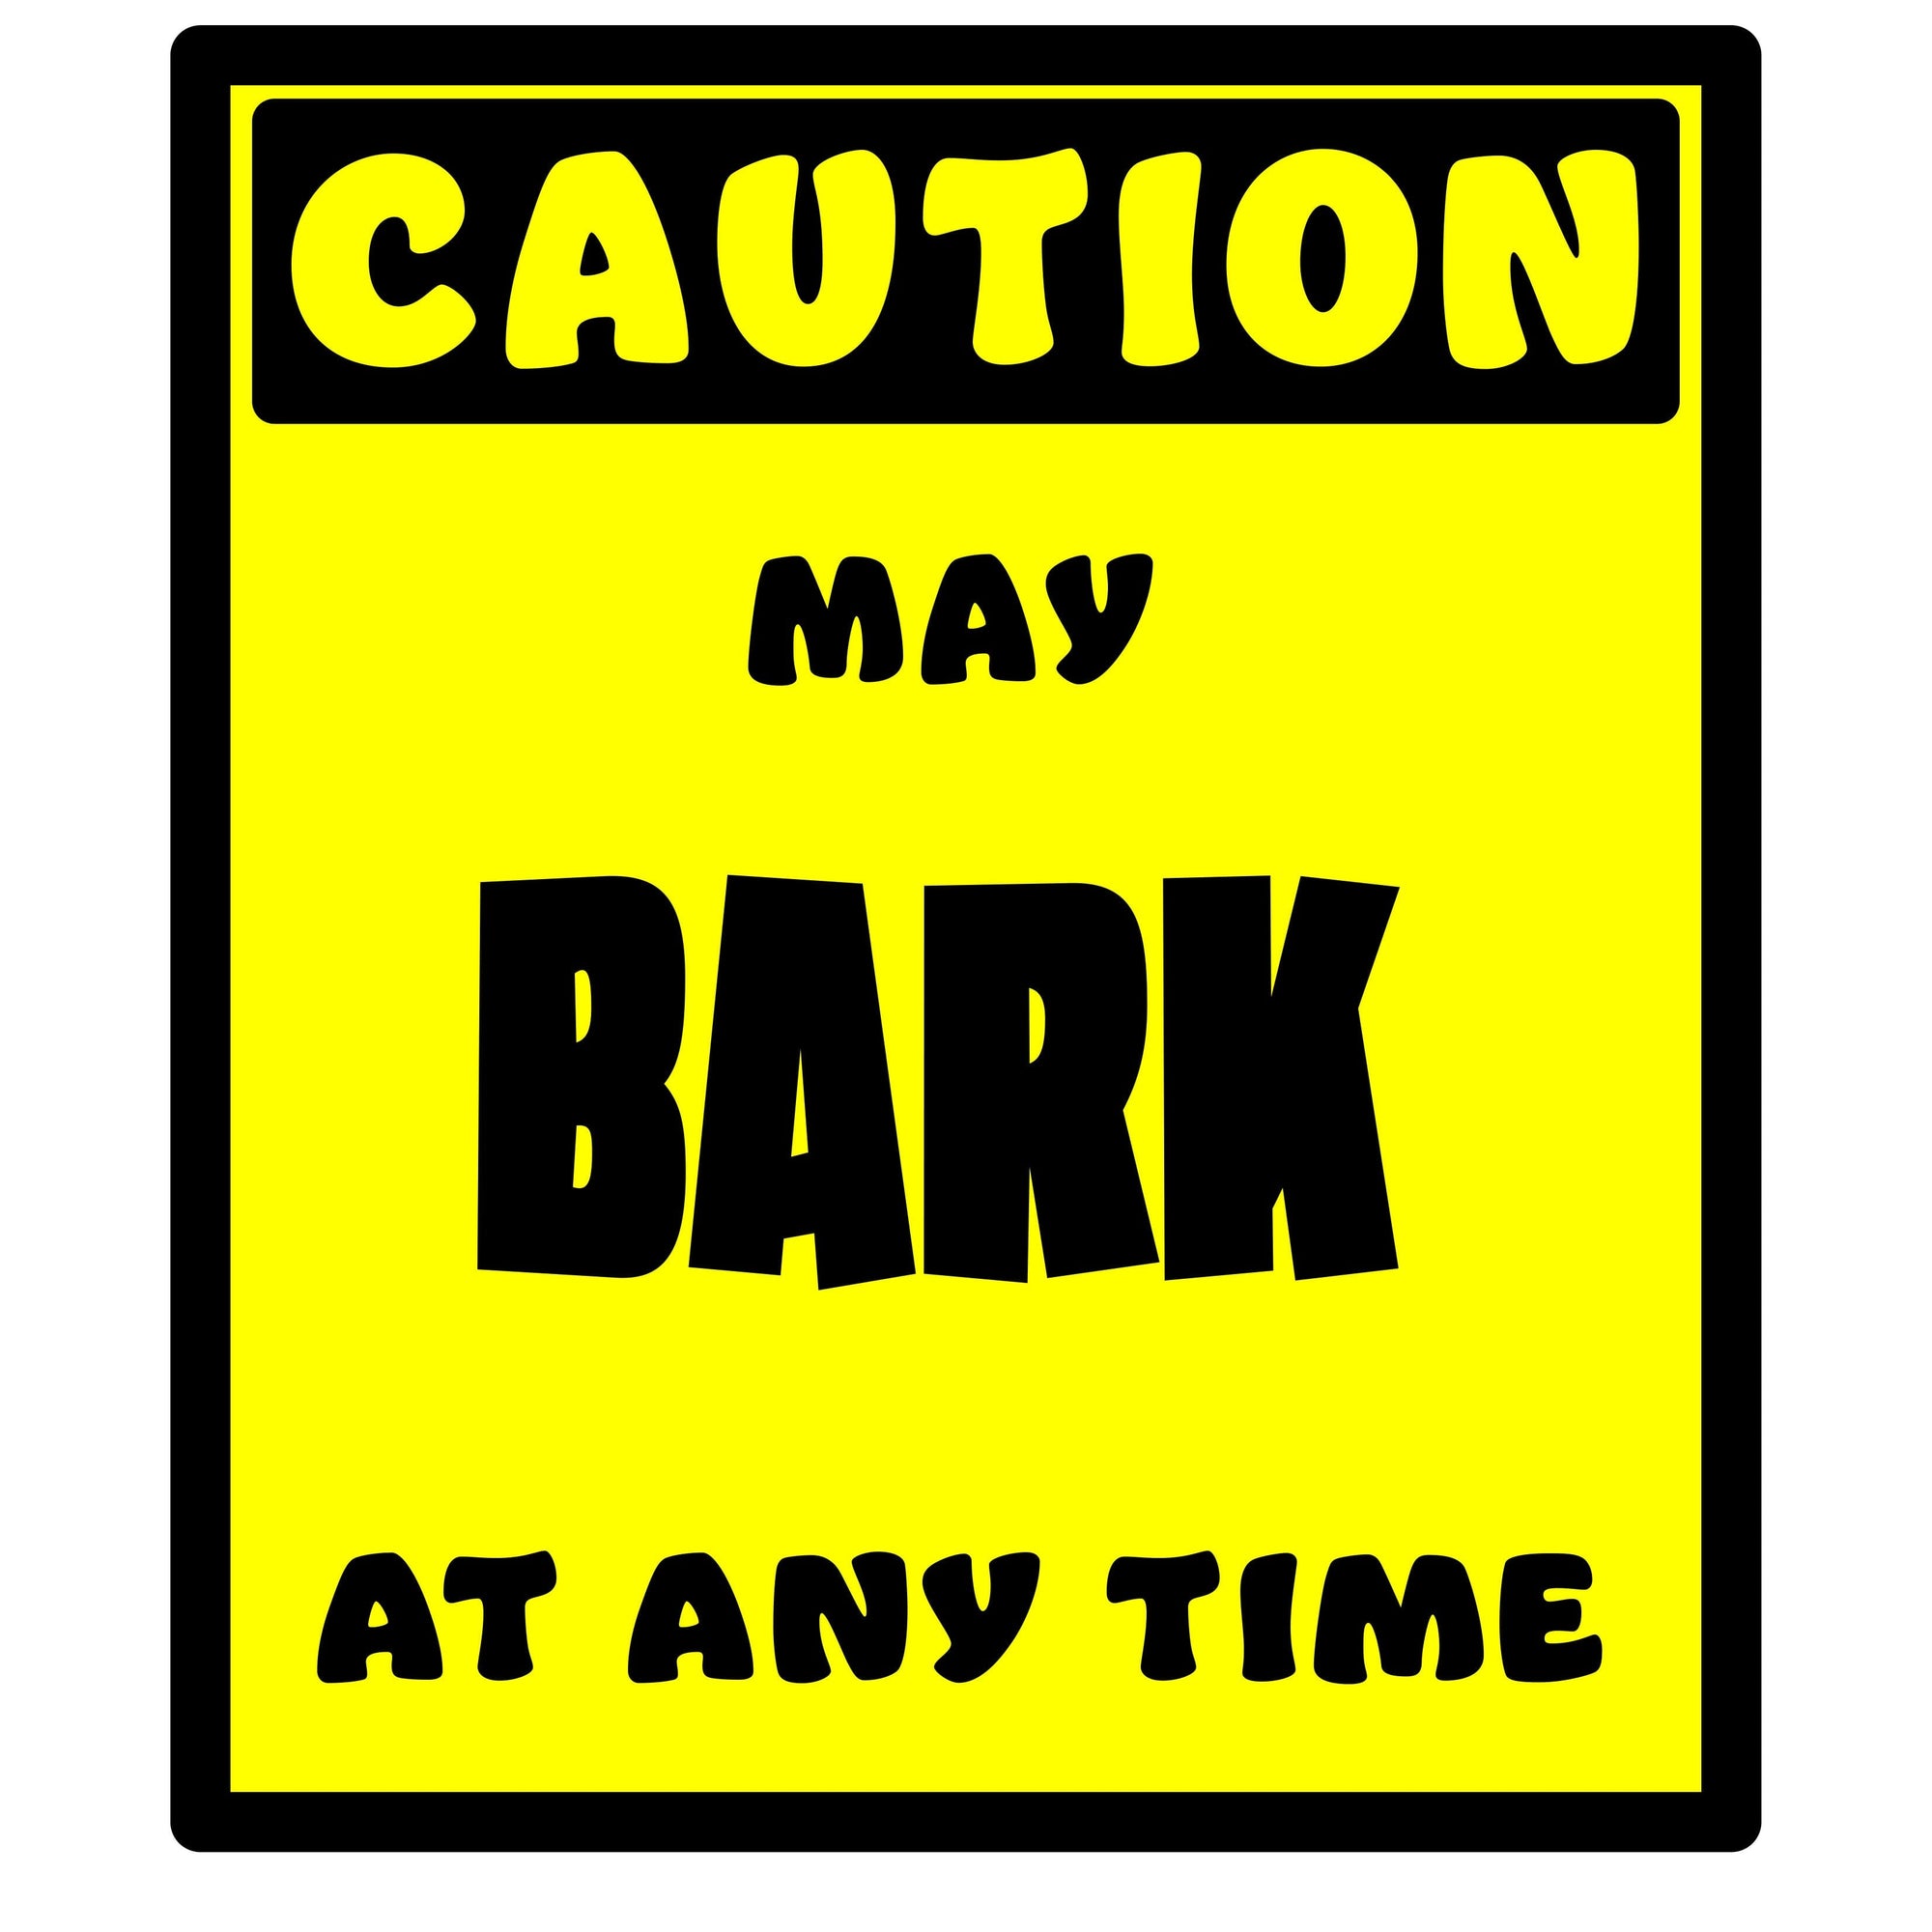 Whootorca - Caution! Series - Caution!  May BARK at any time!